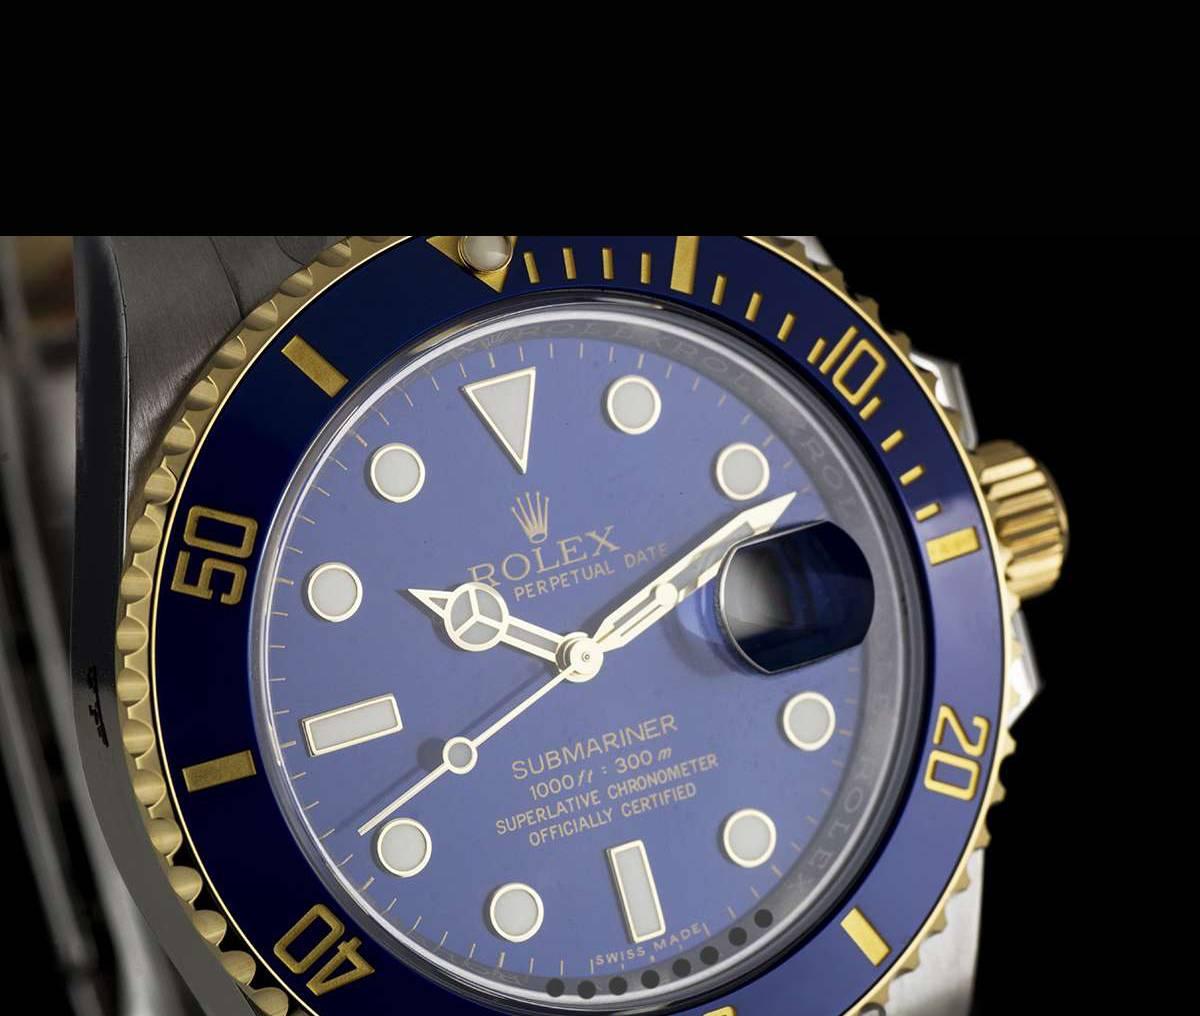 An Unworn Stainless Steel & 18k Yellow Gold Oyster Perpetual Submariner Date Gents Wristwatch, blue dial with applied hour markers, date at 3 0'clock, an 18k yellow gold uni-directional rotating bezel with a blue ceramic insert, a stainless